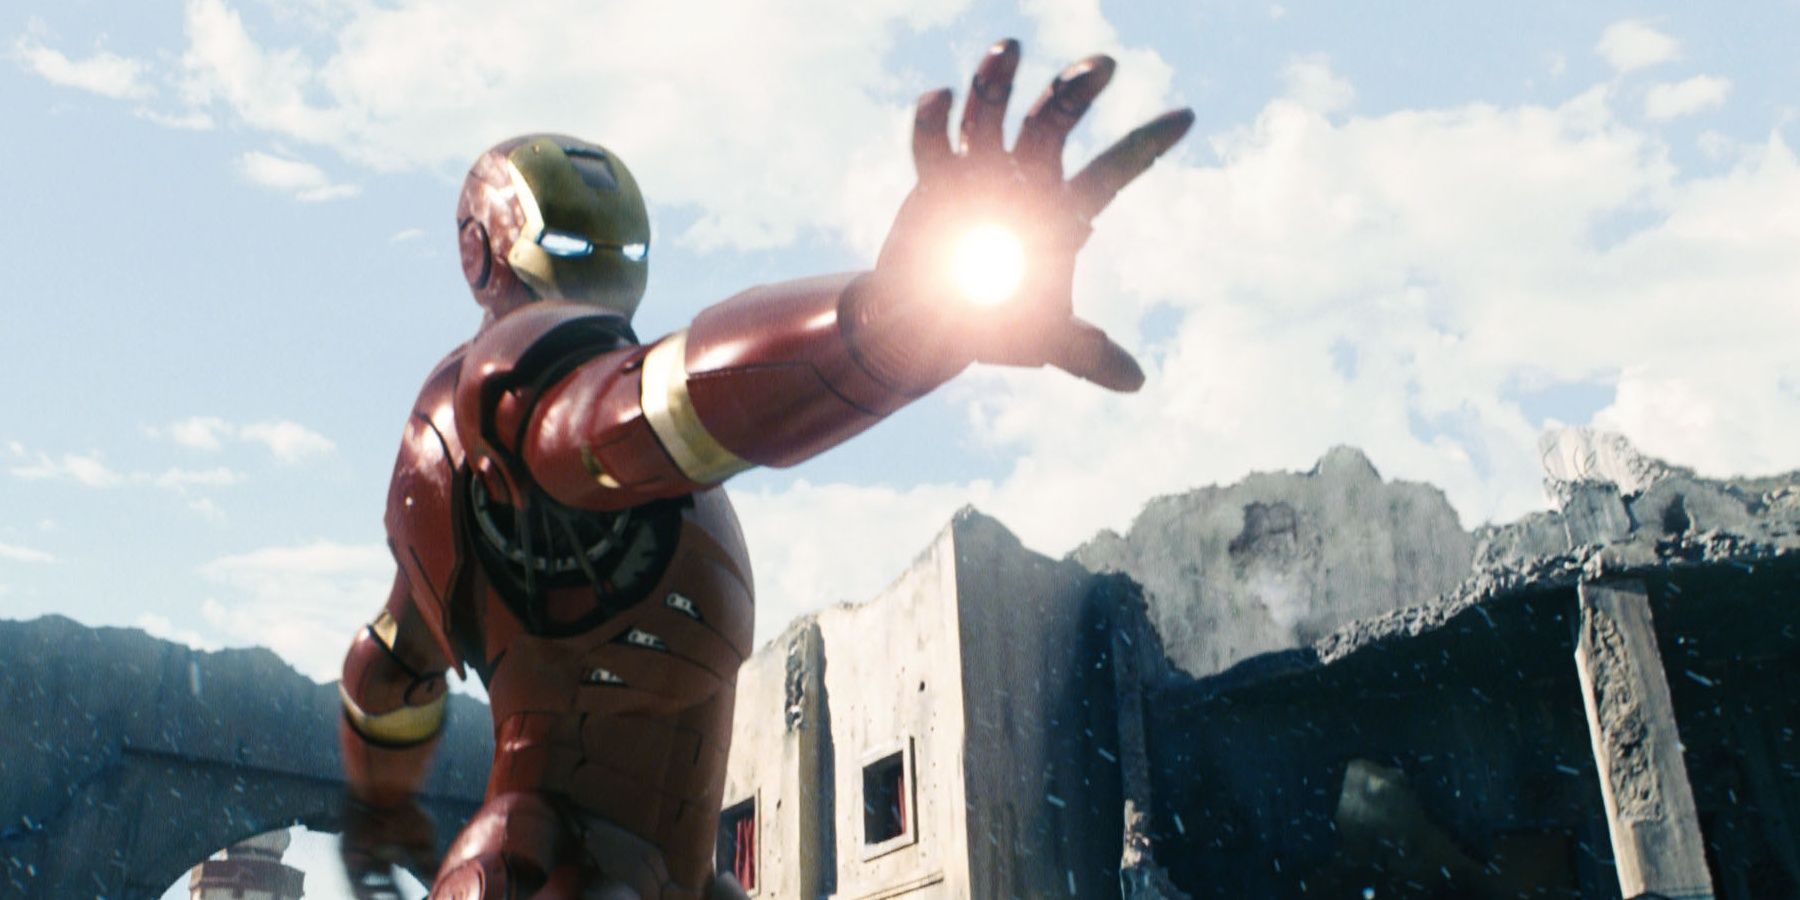 Iron Man with his hand outstretched, about to fire from his suit in Iron Man 1